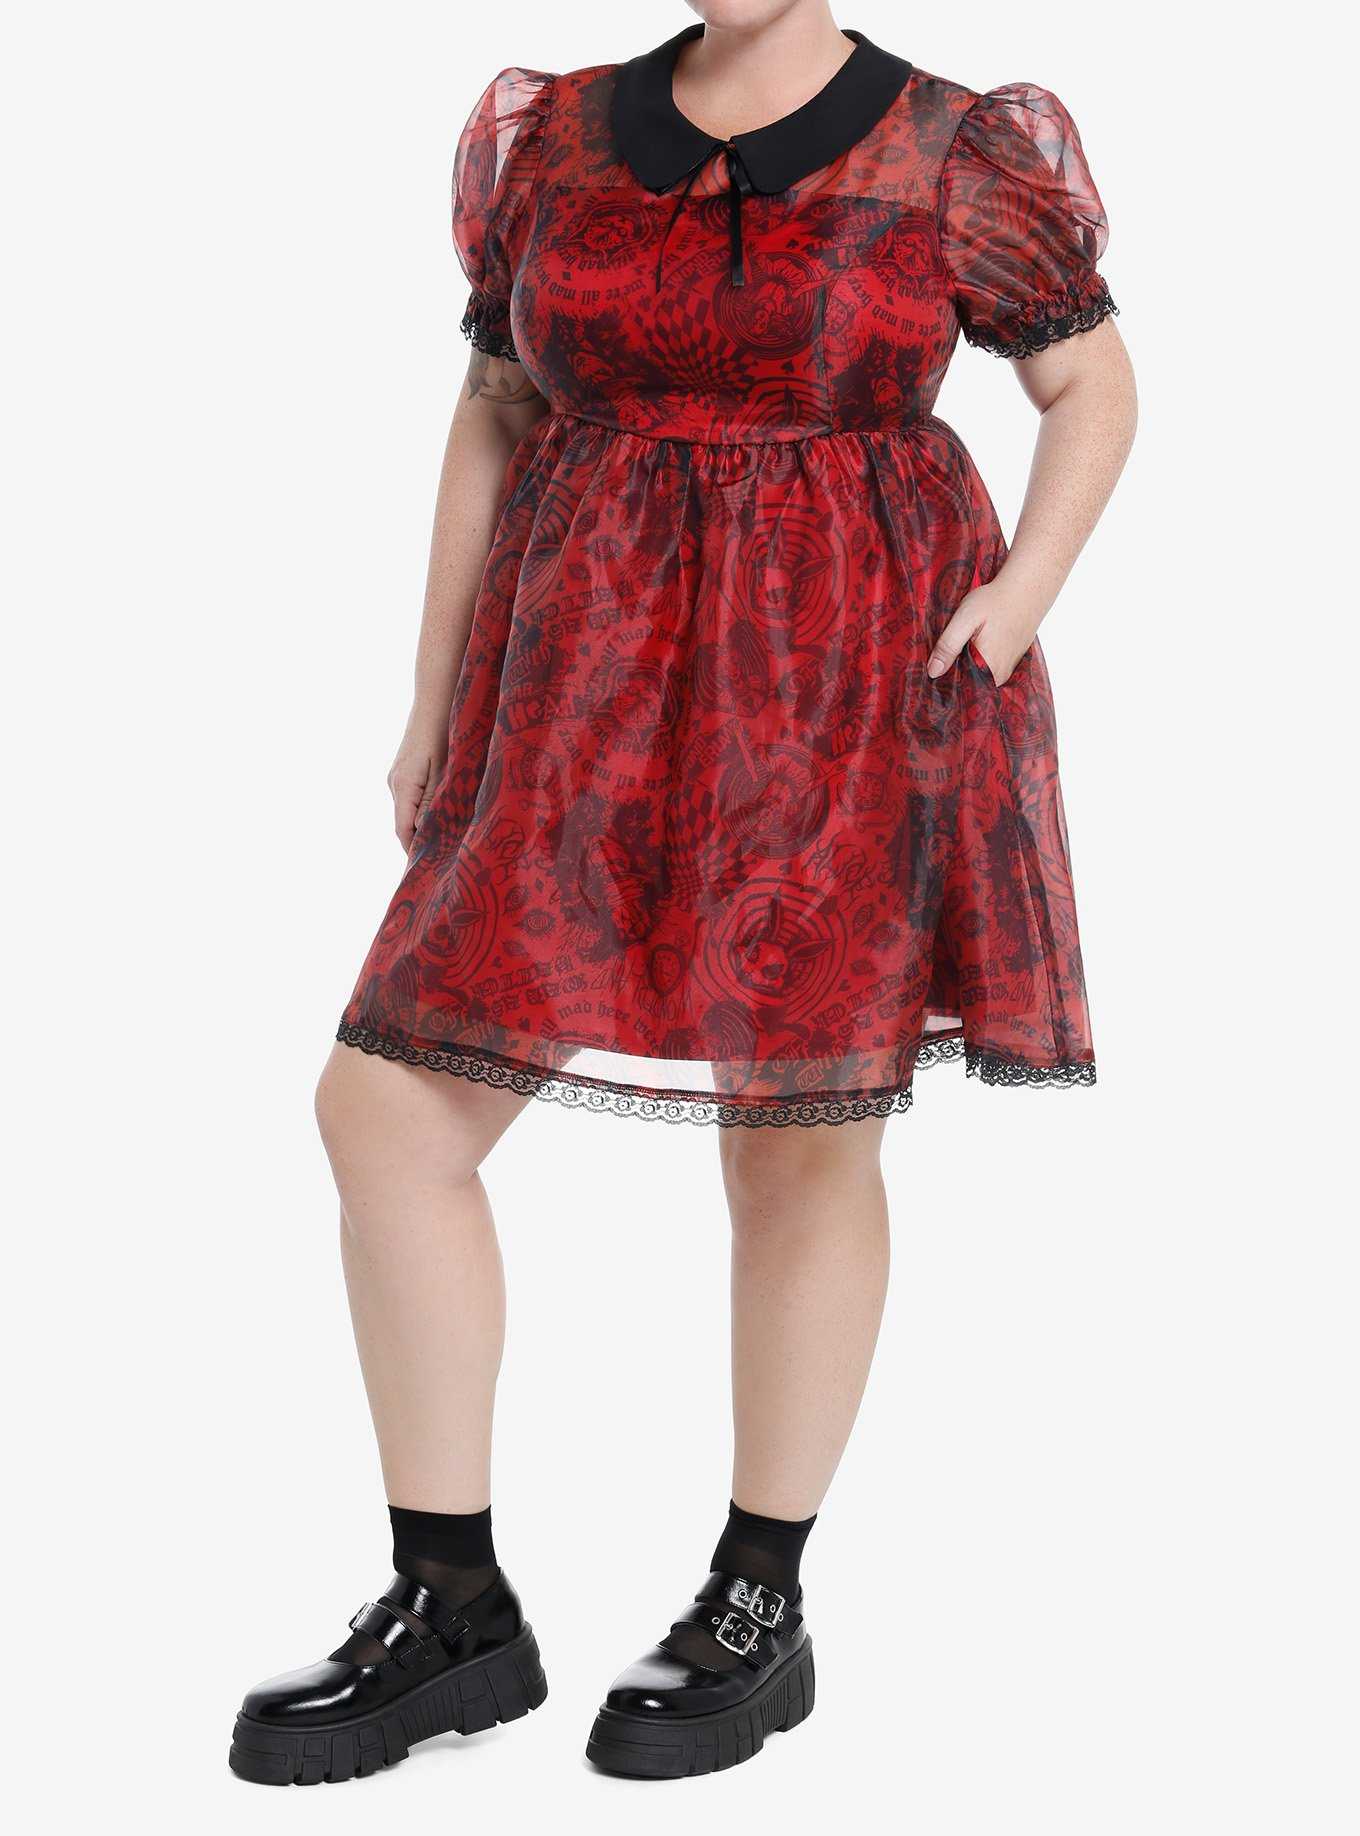 Social Collision Through The Looking Glass Organza Dress Plus Size, , hi-res